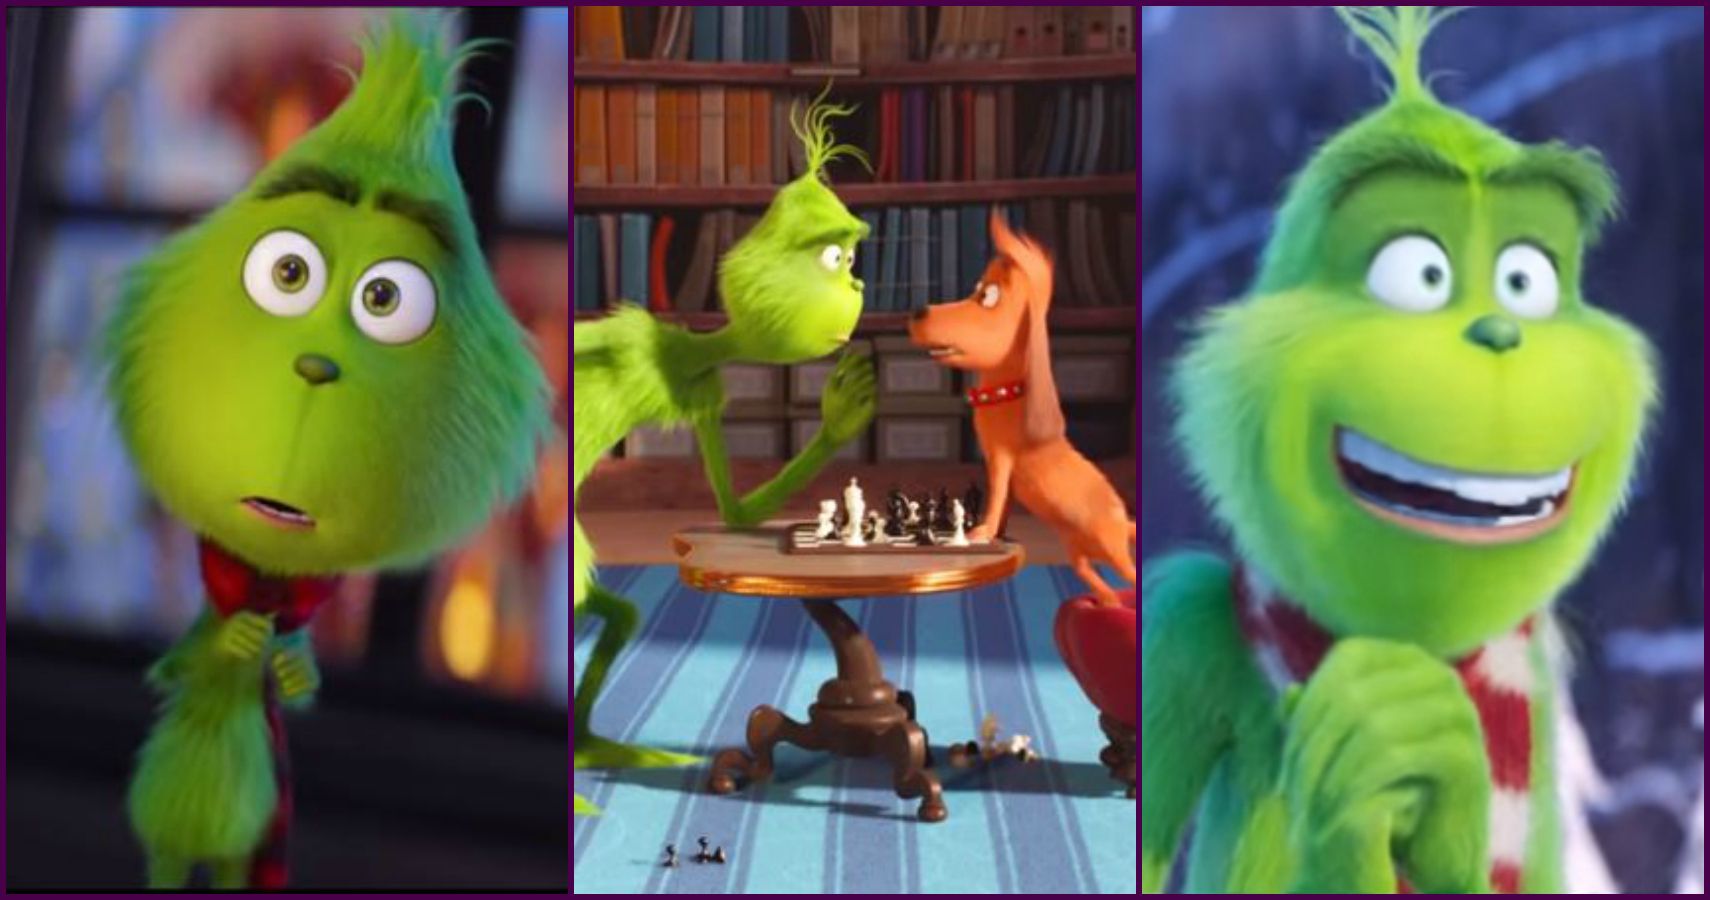 Our Hearts Just Grew Two Sizes Watching The New Grinch Movie Trailer